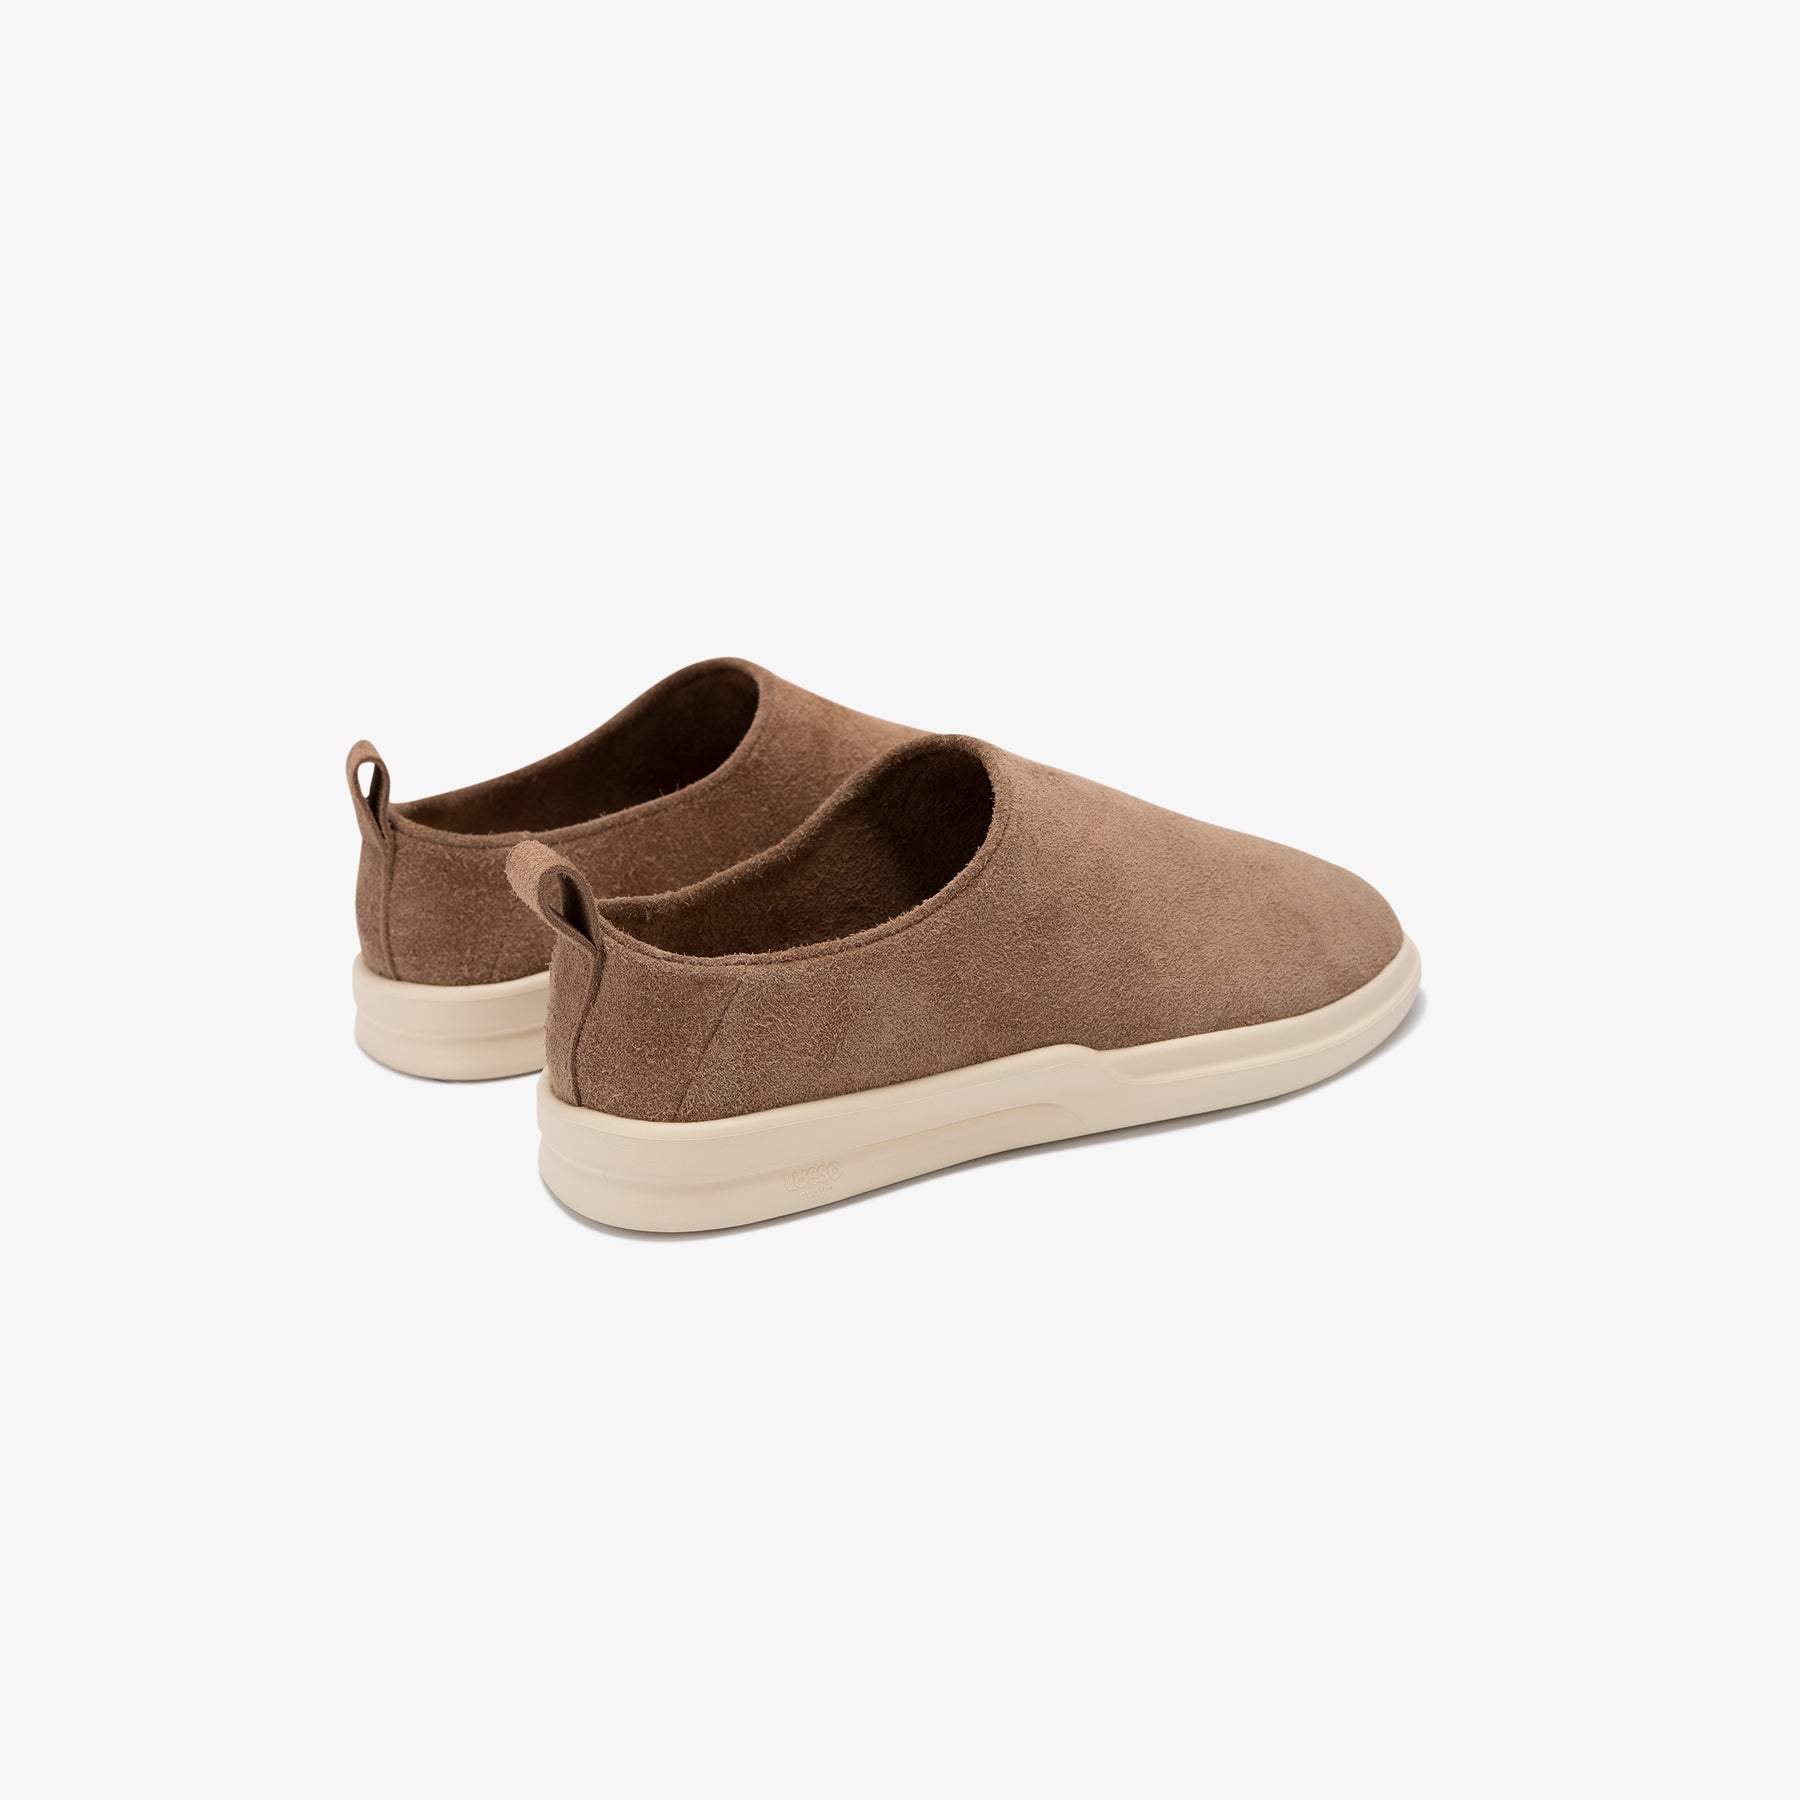 Gehry - Chestnut Hairy Suede / Shortbread